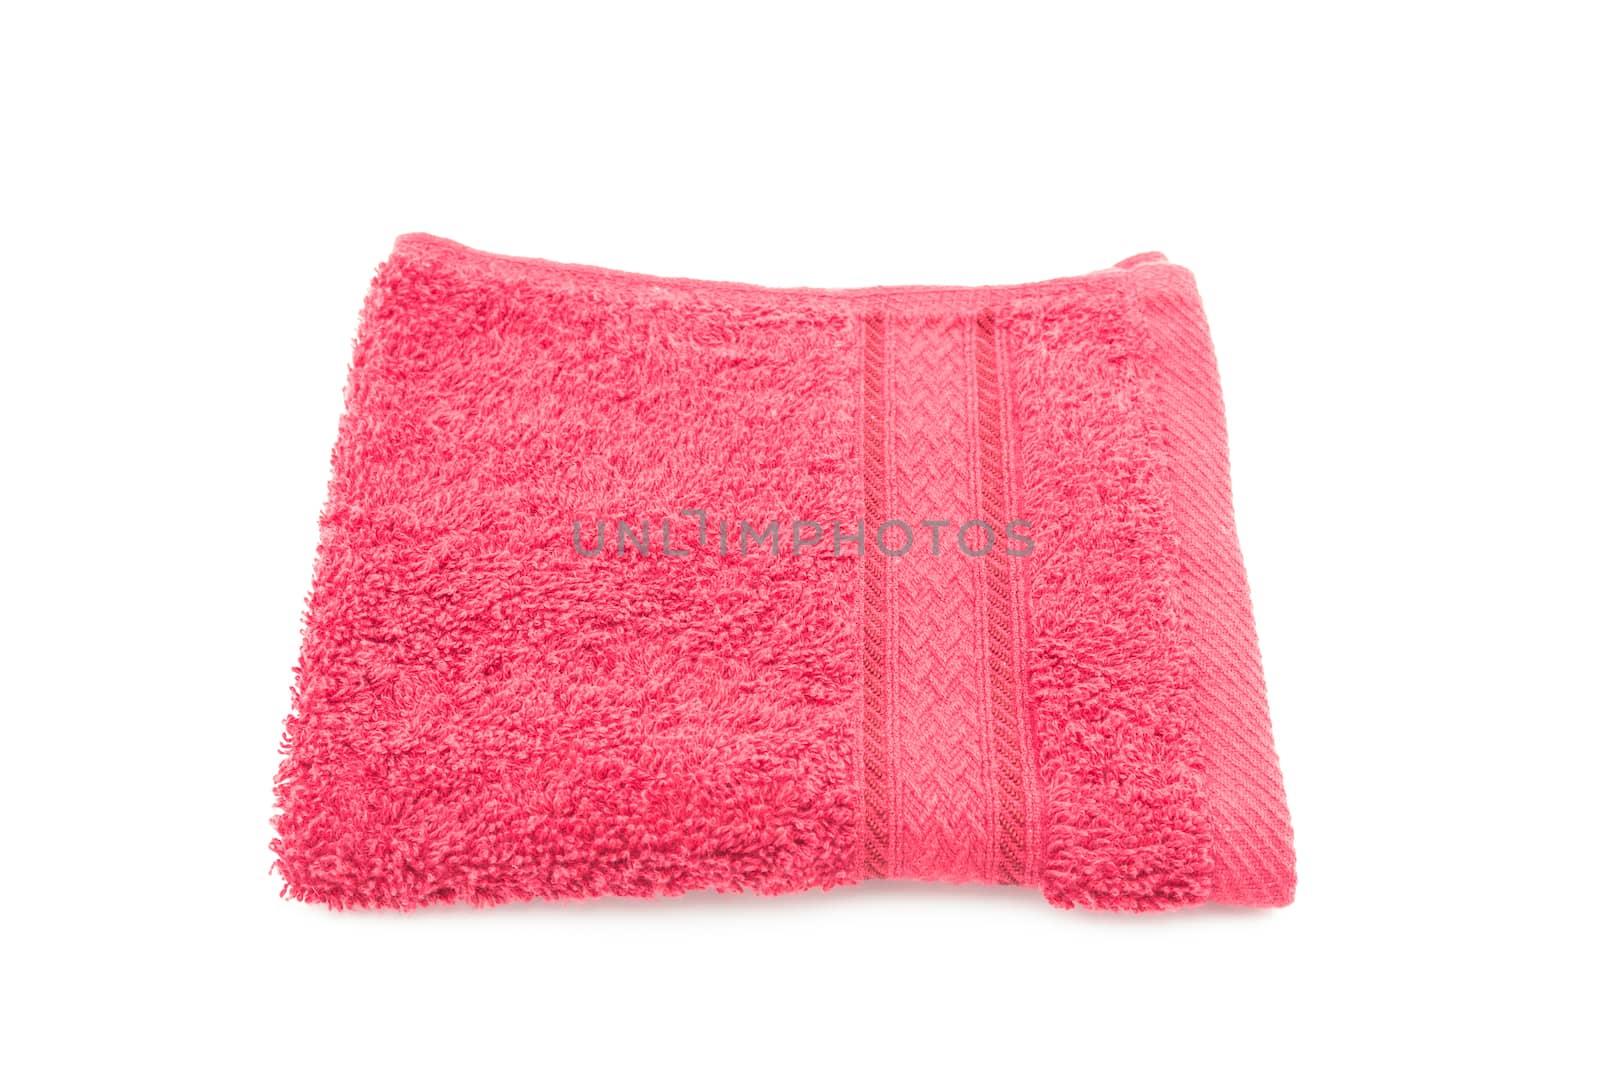 Red towel on white background by vitawin